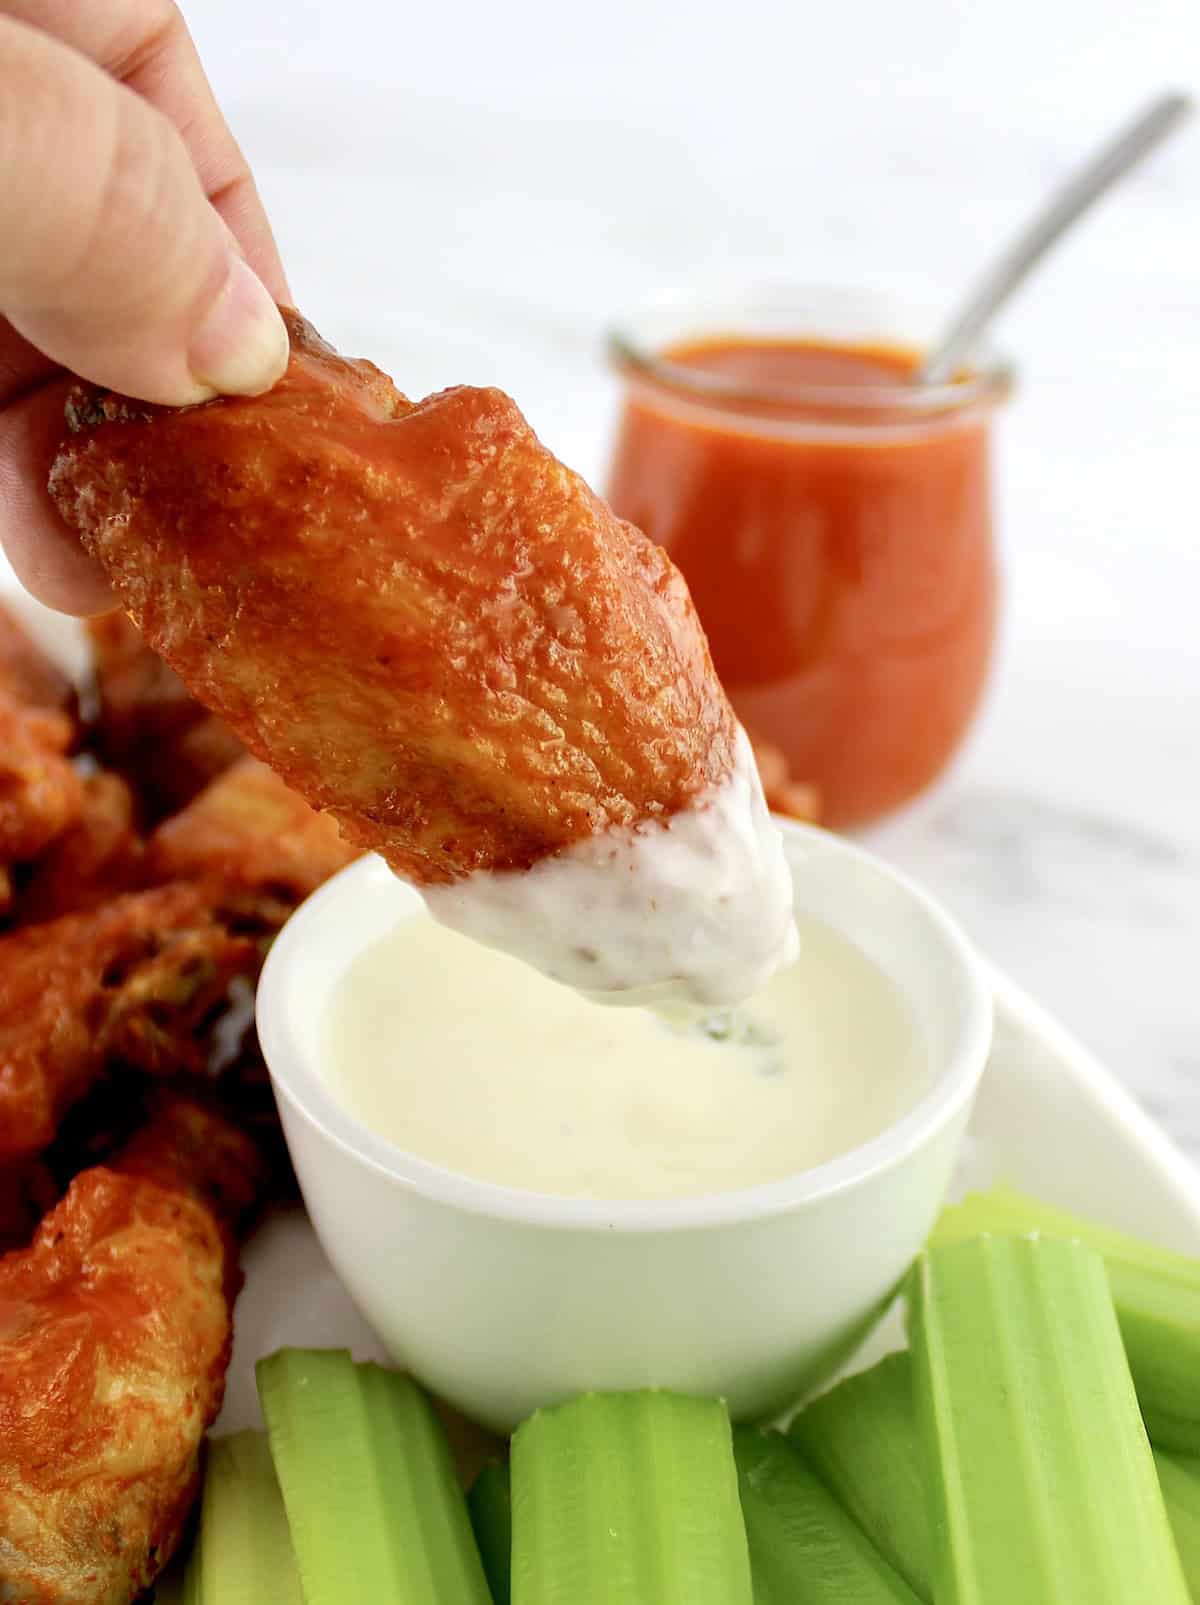 Crispy Air Fryer Buffalo Wing being dipped in blue cheese dressing in white cup